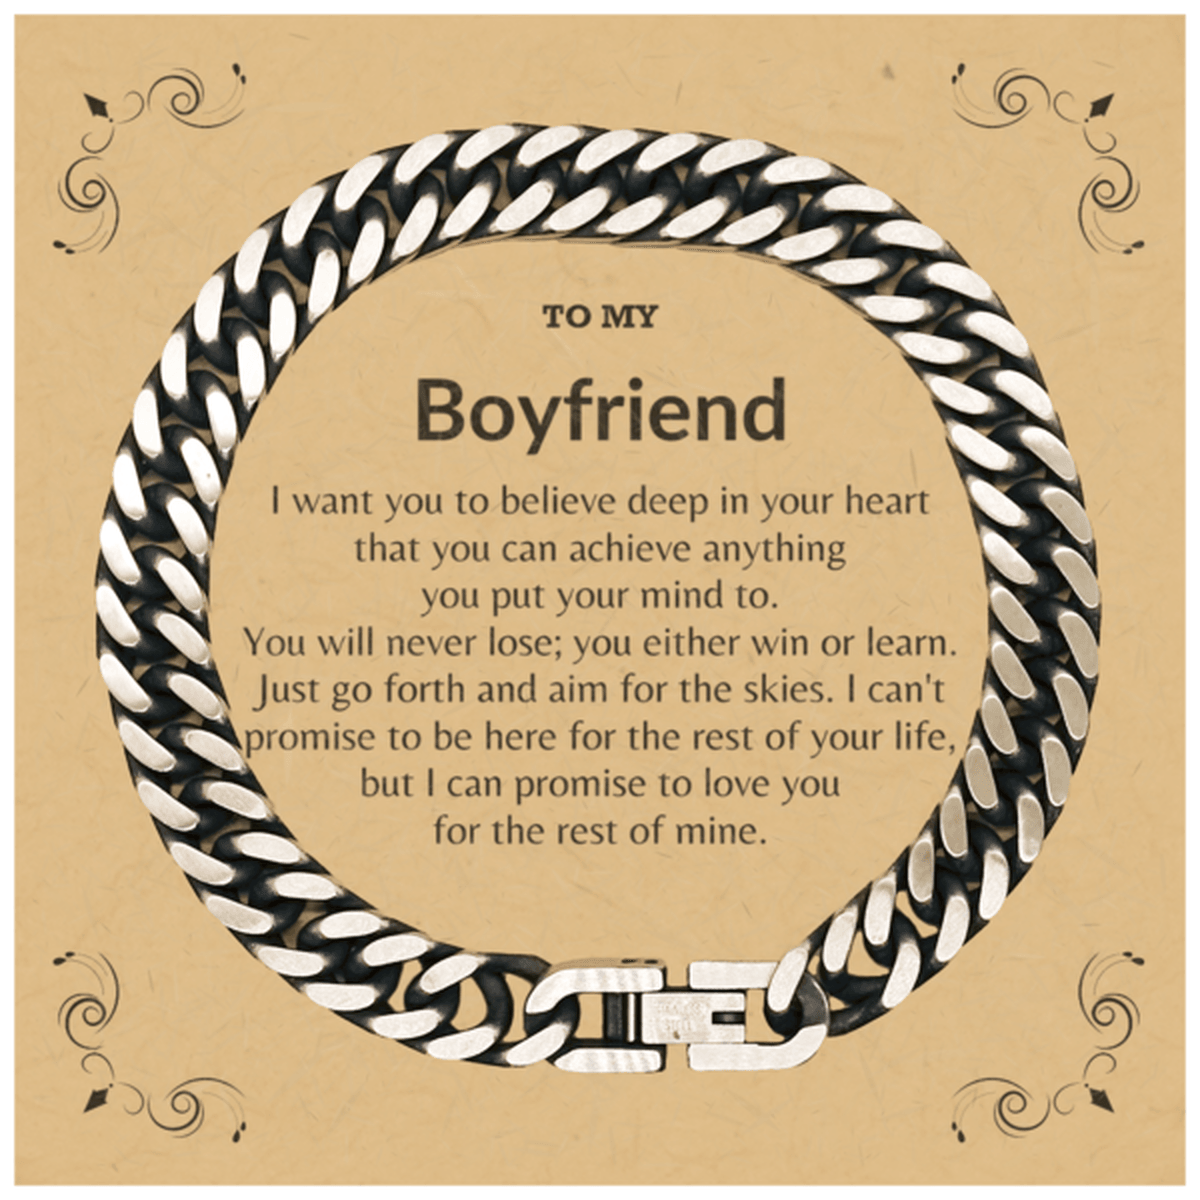 Motivational Boyfriend Cuban Link Chain Bracelet, I can promise to love you for the rest of my life; Birthday, Christmas Holiday Jewelry Gift - Mallard Moon Gift Shop